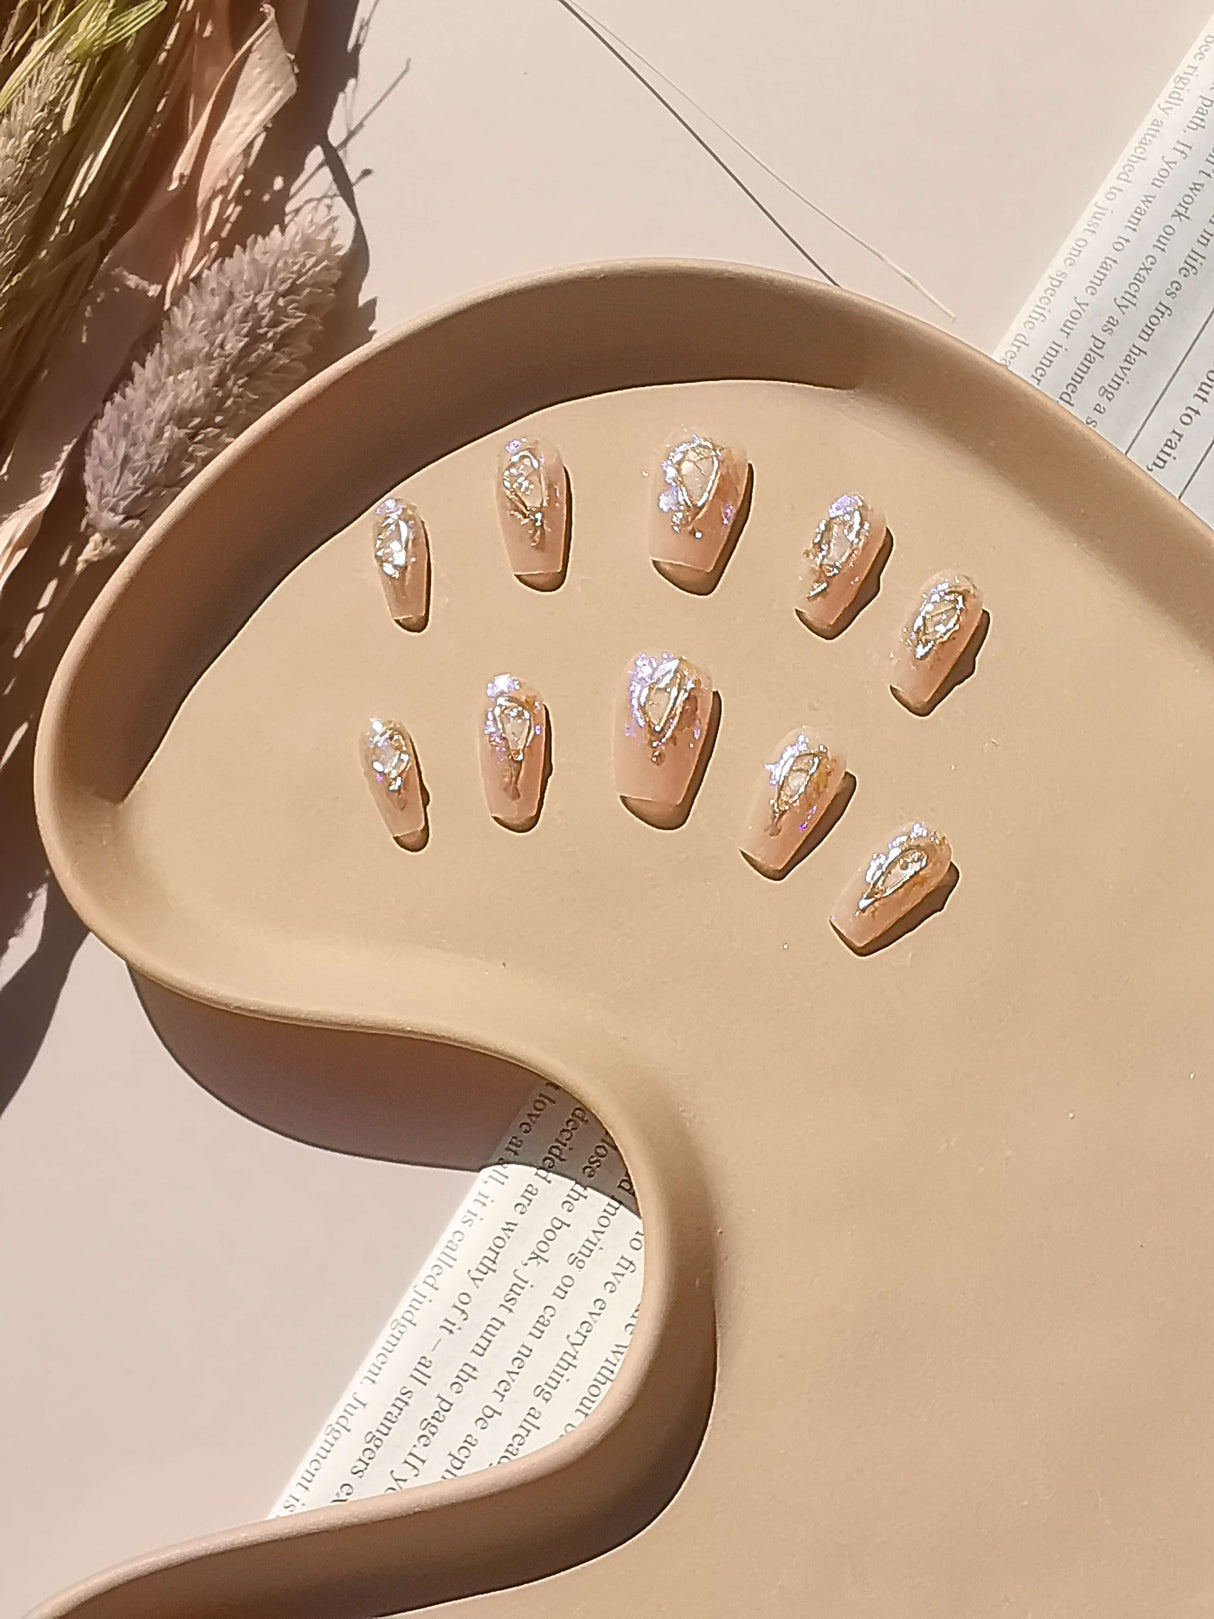 These press-on nails are for cute purposes, with a glamorous and fancy design. They feature a metallic gold base and a white pattern, displayed with a natural light shadow. 